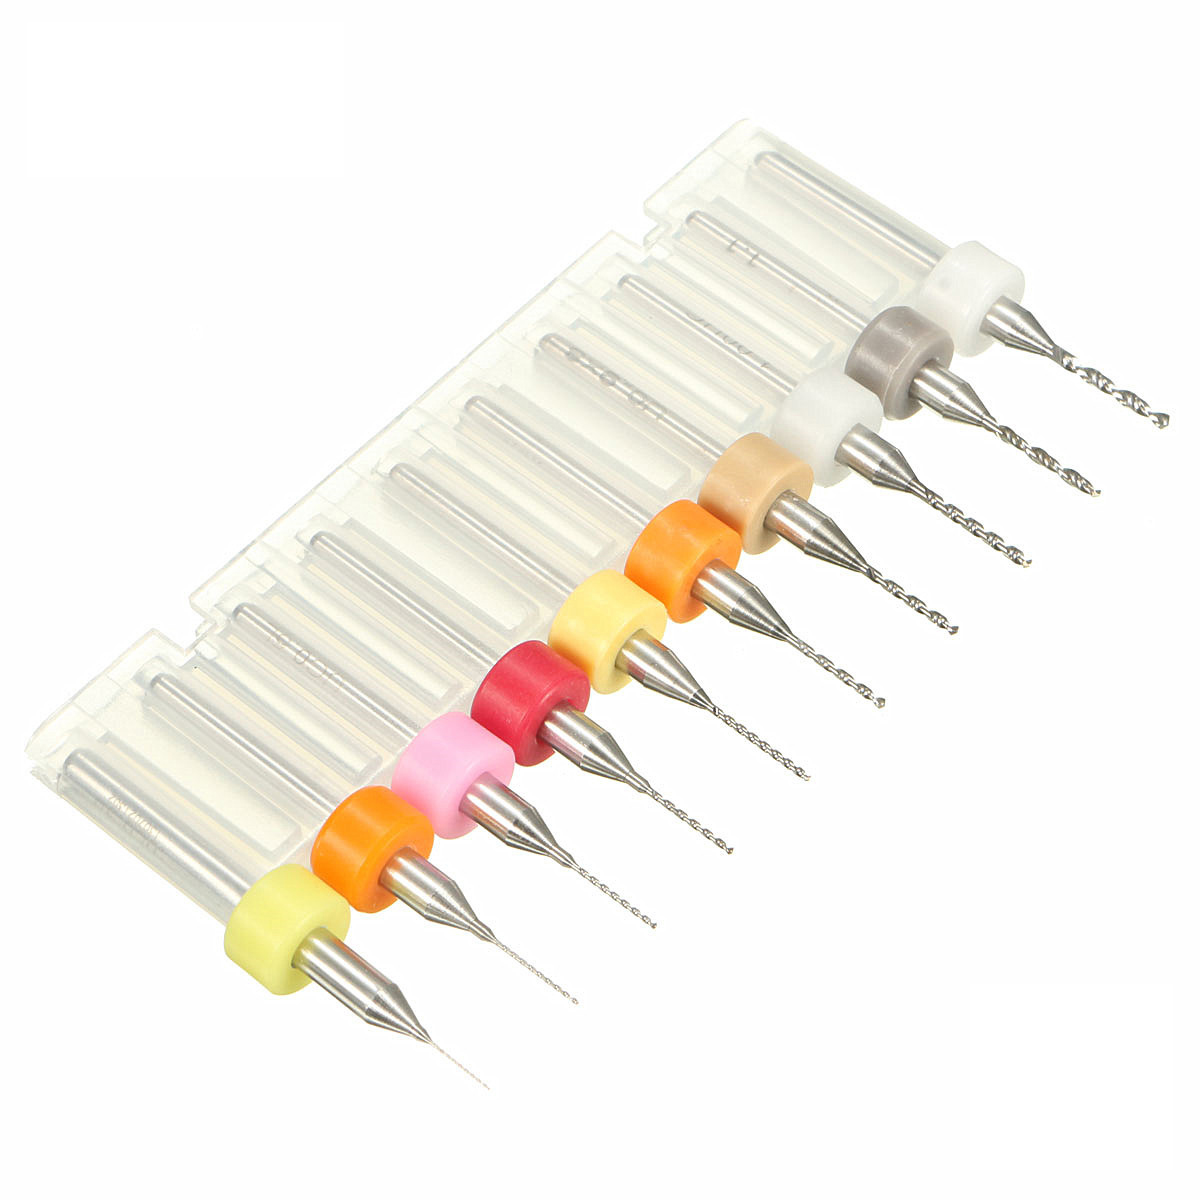 PCB Details about   10pcs Carbide Micro Drill Bits PCB Print Circuit Board Cutting Tool